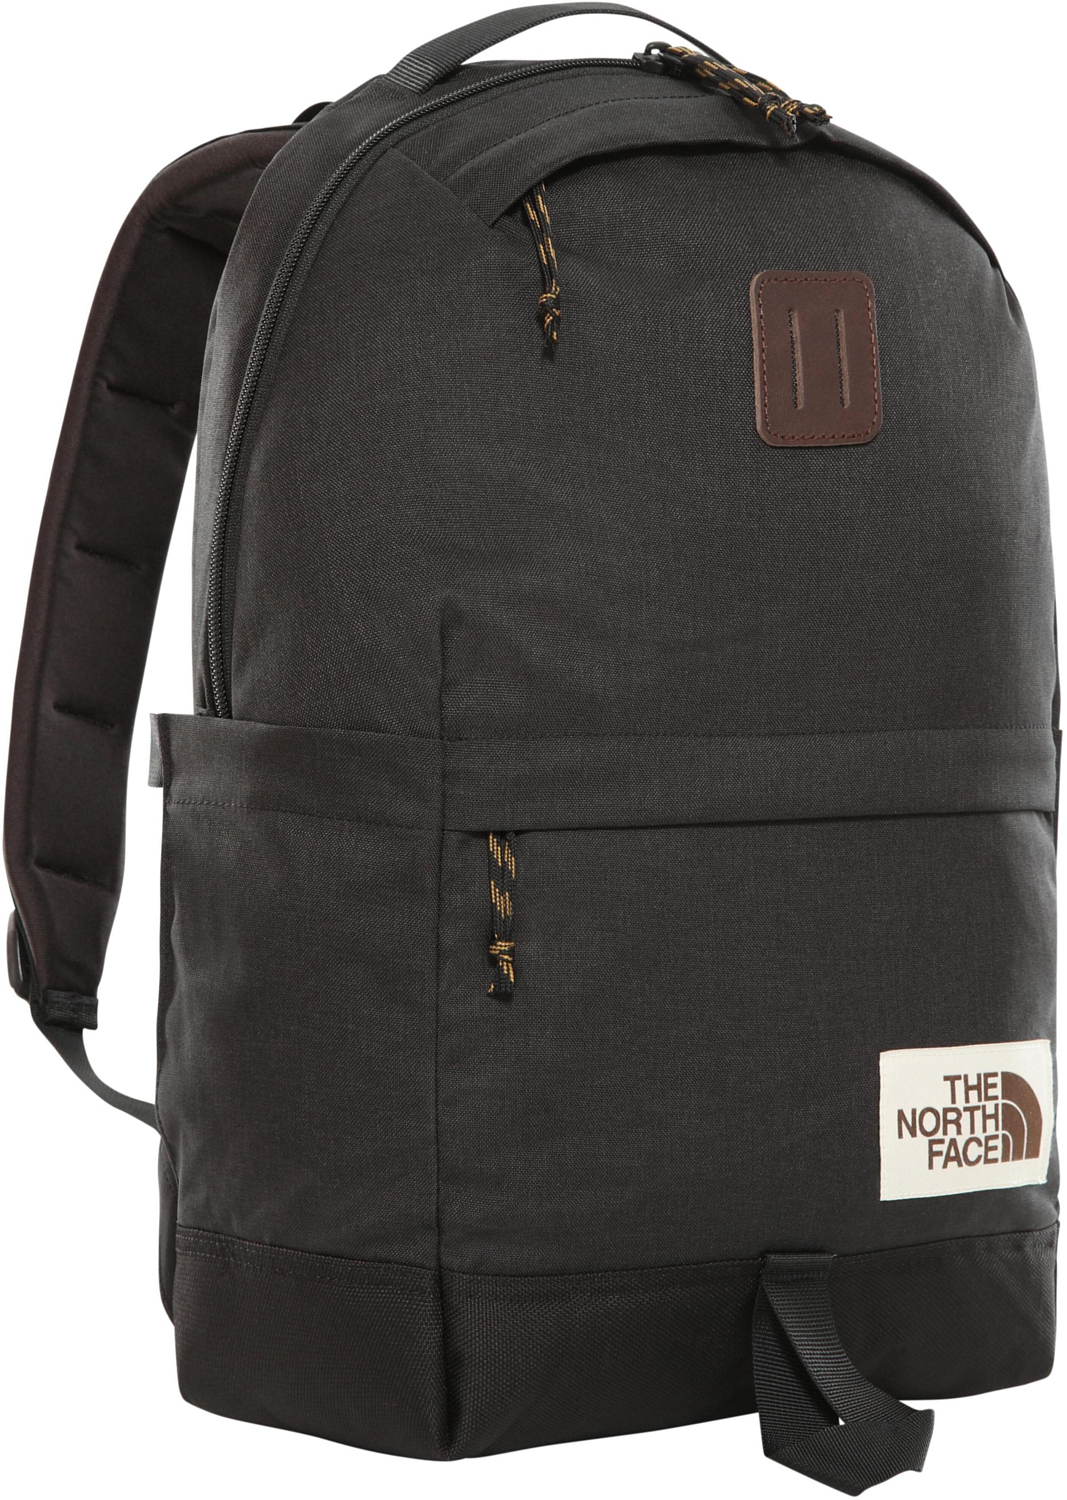 Рюкзак The North Face Daypack Tnf Black Heather